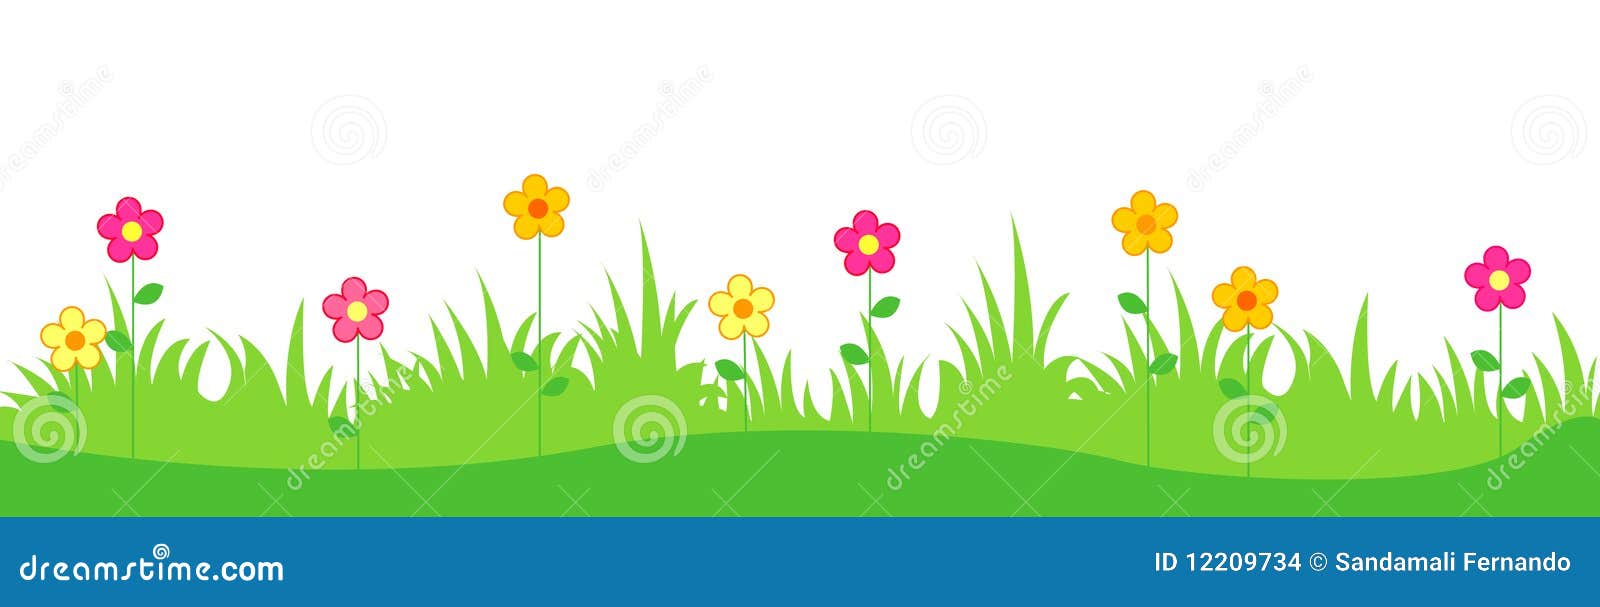 spring clip art banners - photo #10